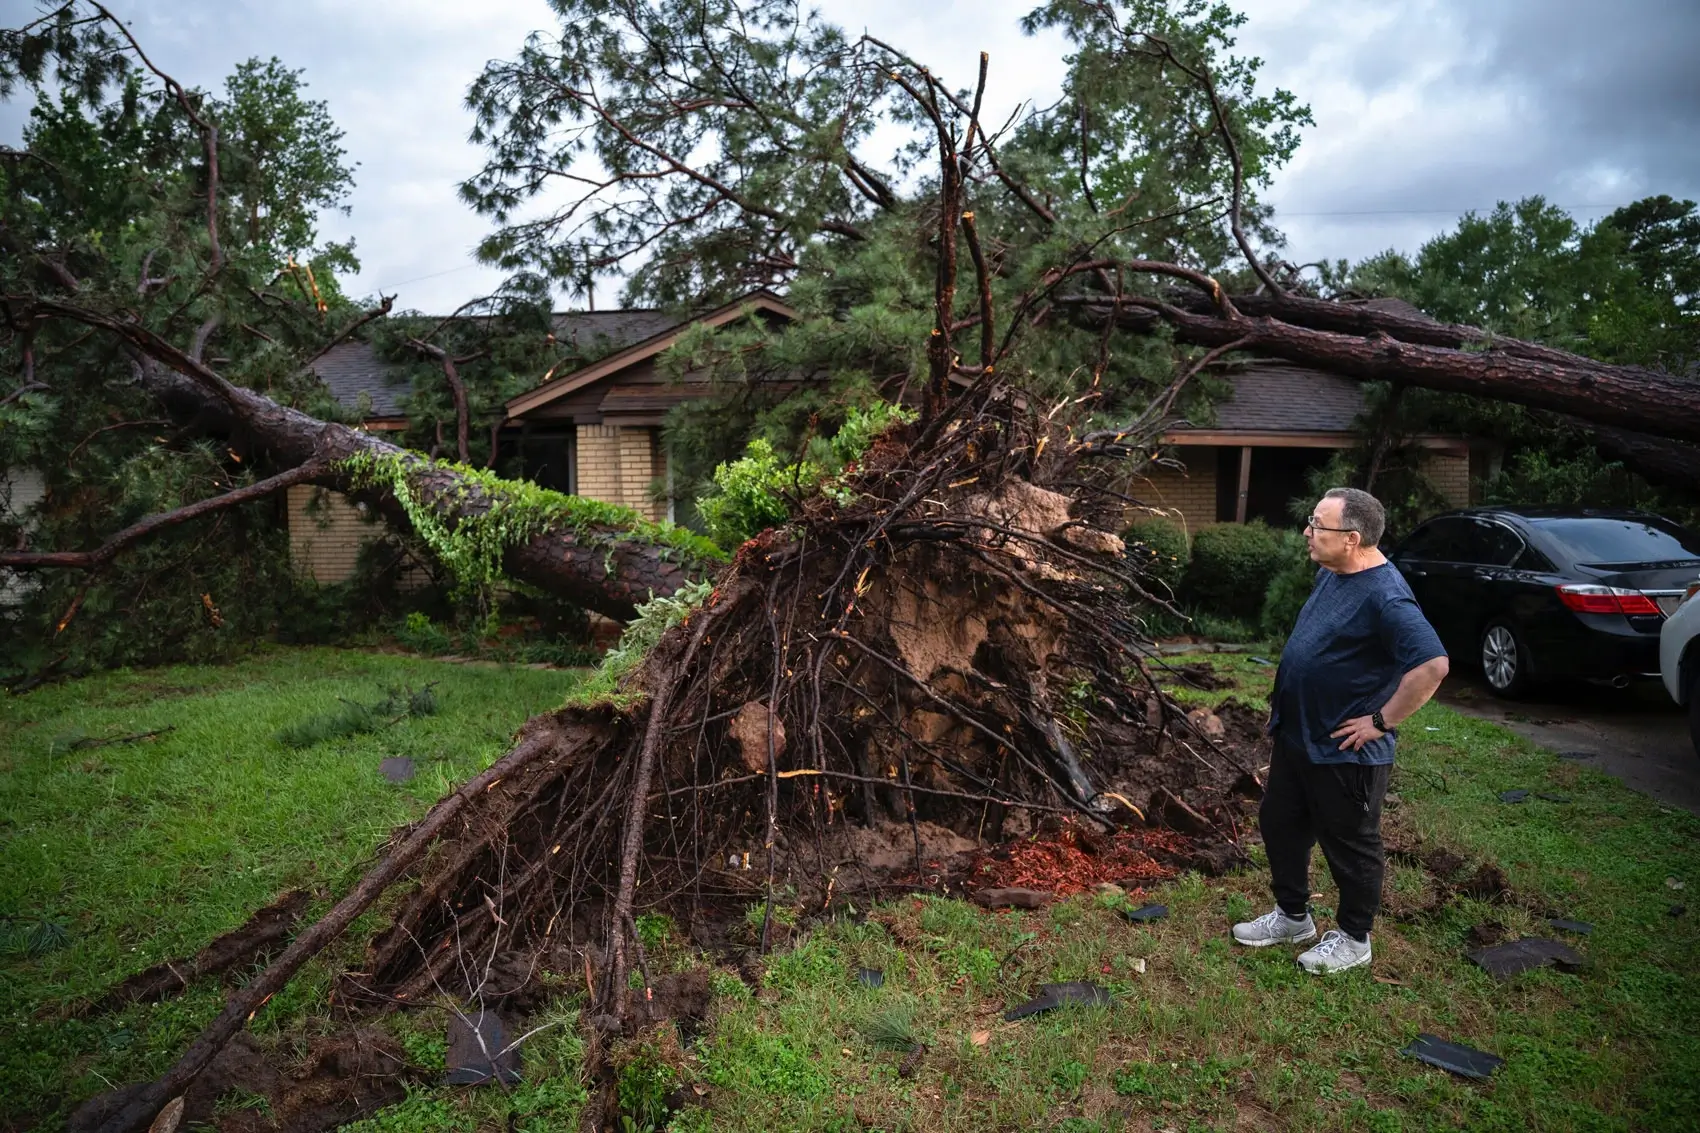 A man stands by a fallen tree after severe storms left nearly 900,000 CenterPoint Energy customers without power and killed at least four people in the Houston area